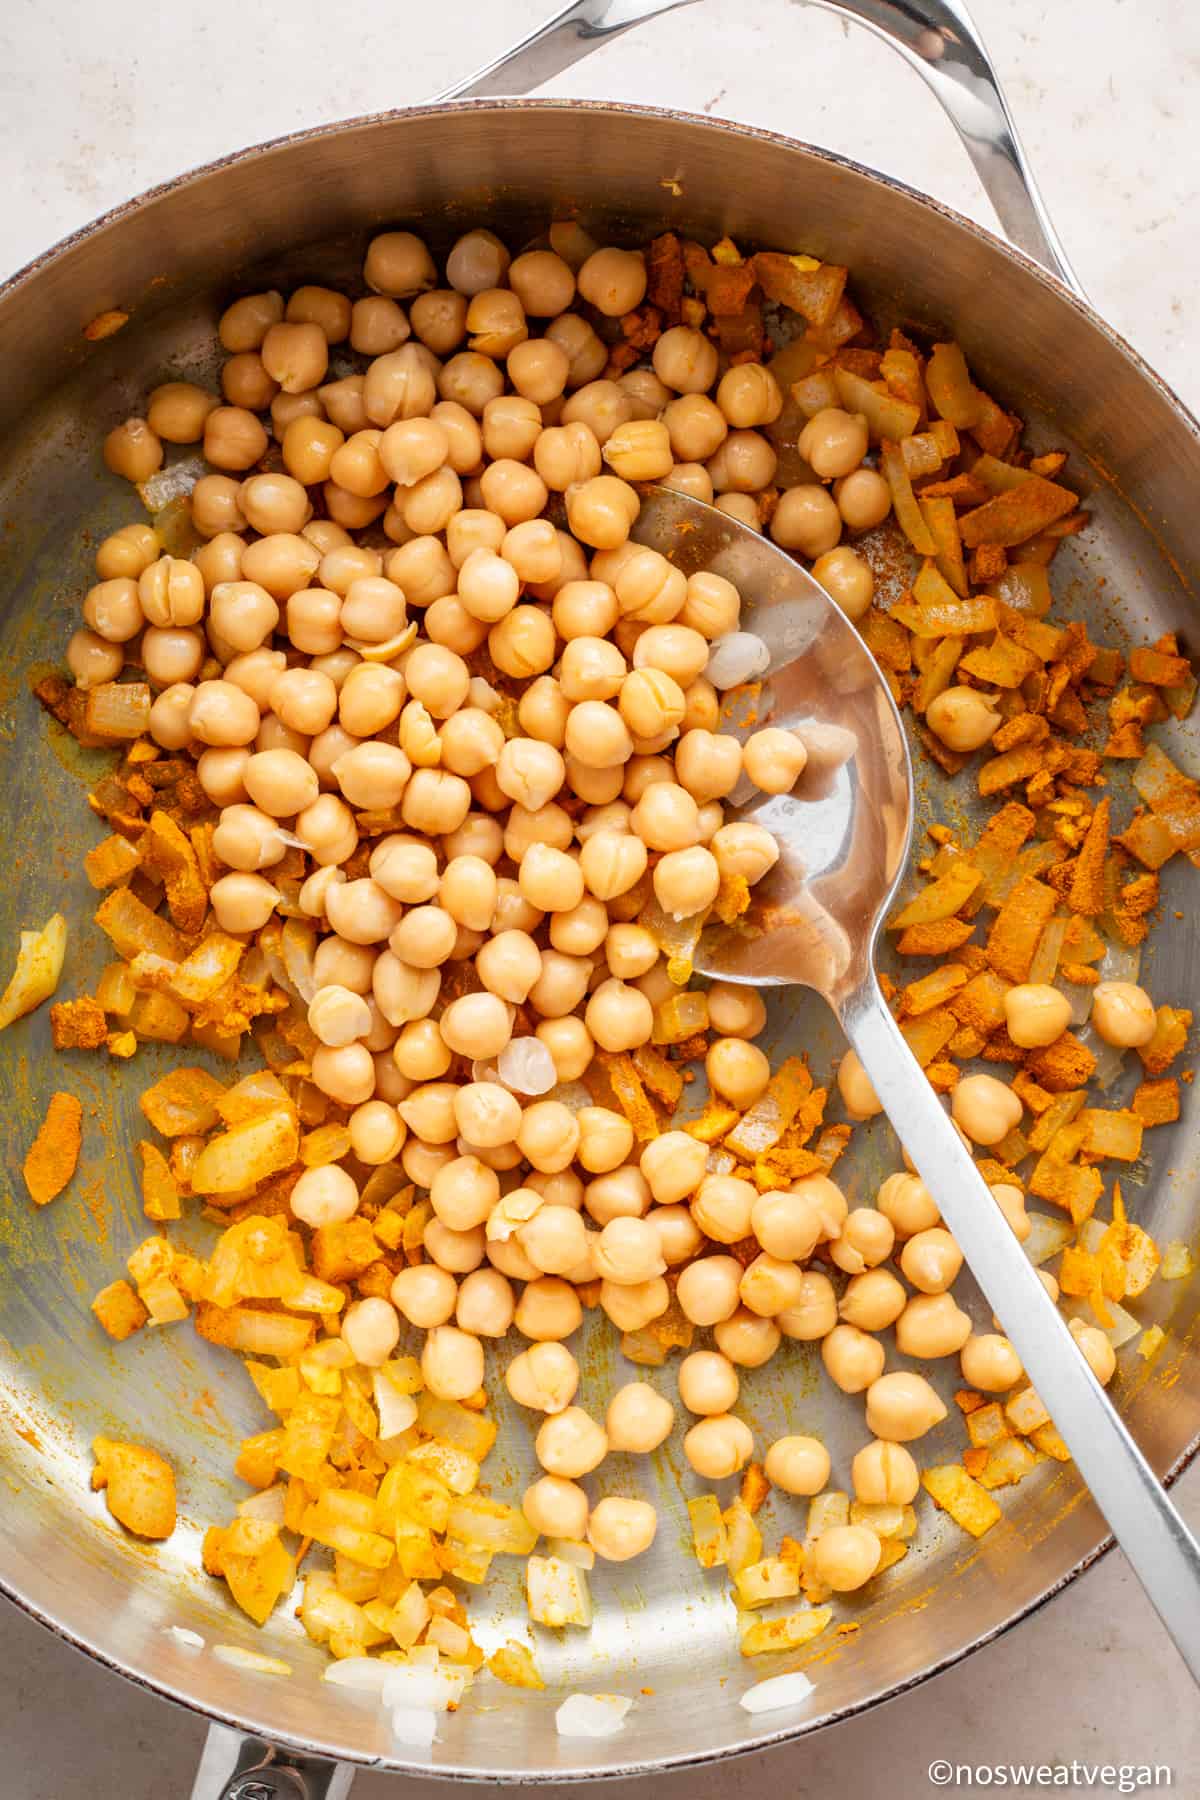 Chickpeas added to curry.